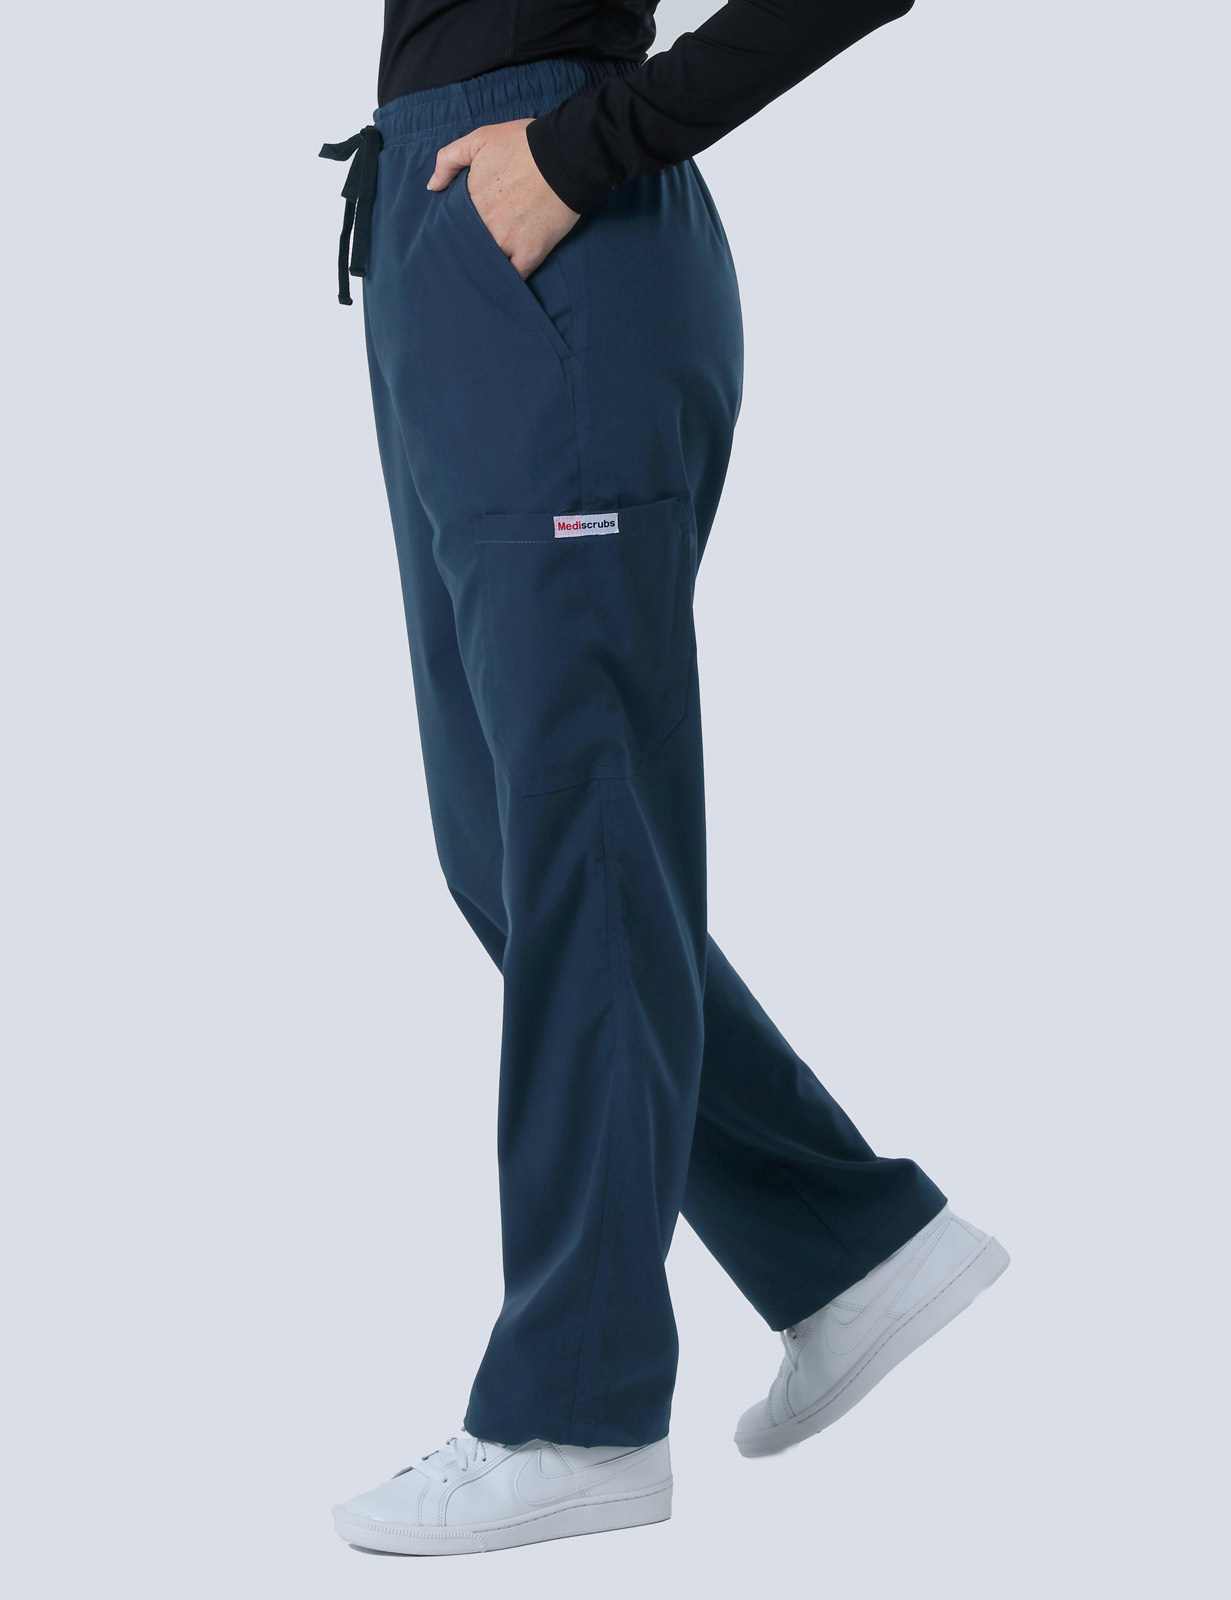 Melbourne Hospital - Wards CN (Women's Fit Spandex Scrub Top and Cargo Pants in Navy incl Logos)